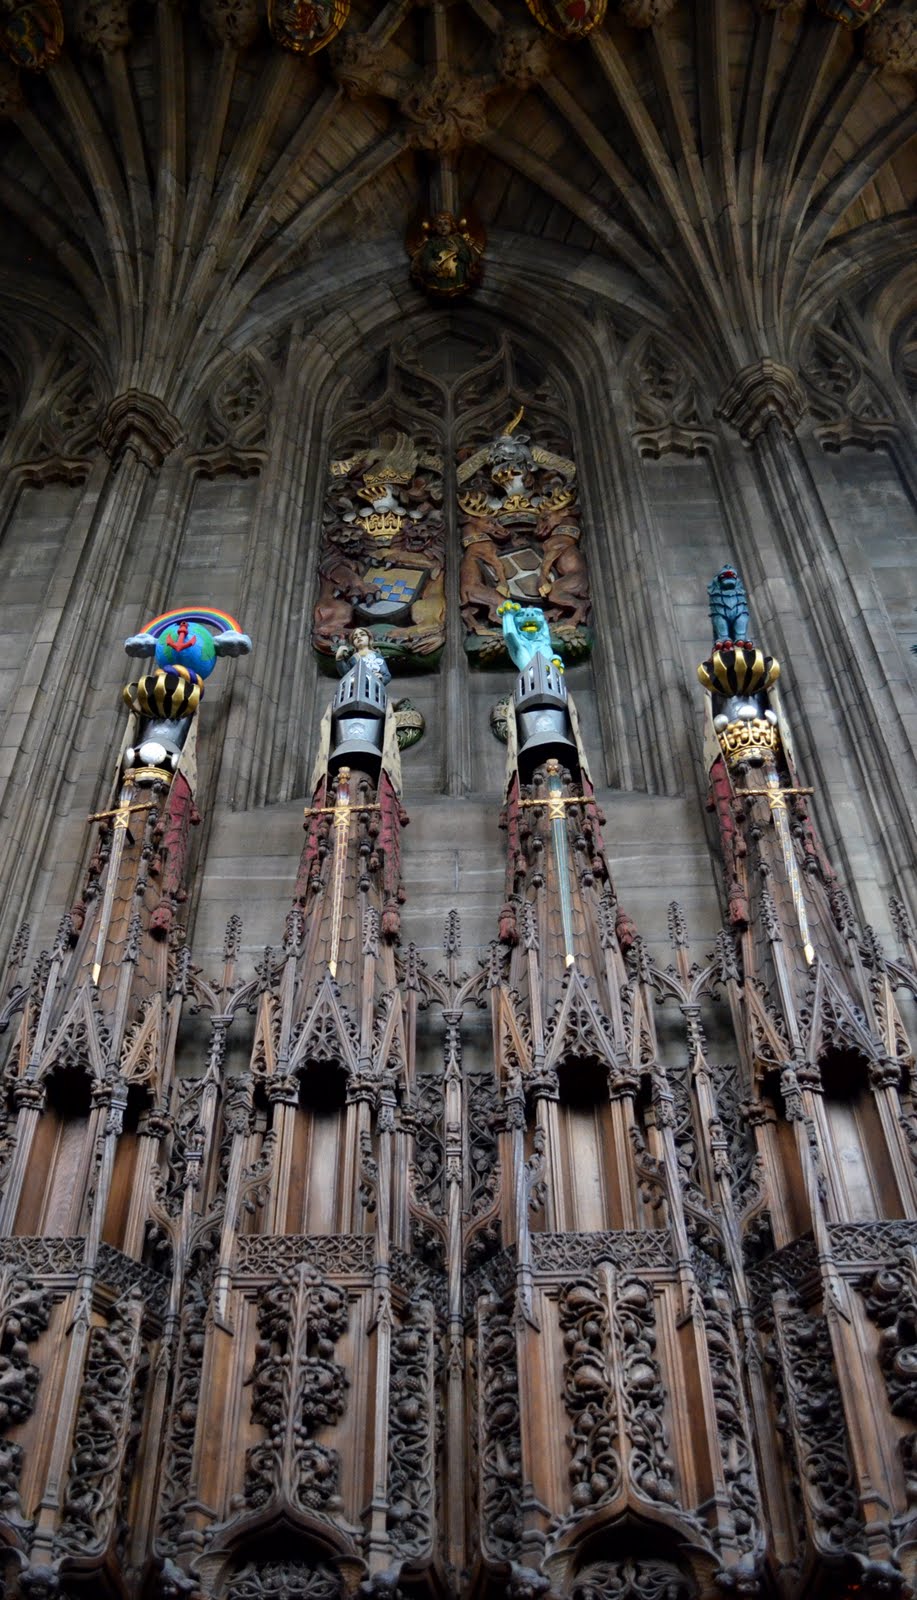 Tour Scotland Photographs: Tour Scotland Photographs The Thistle Chapel St Giles Cathedral Royal